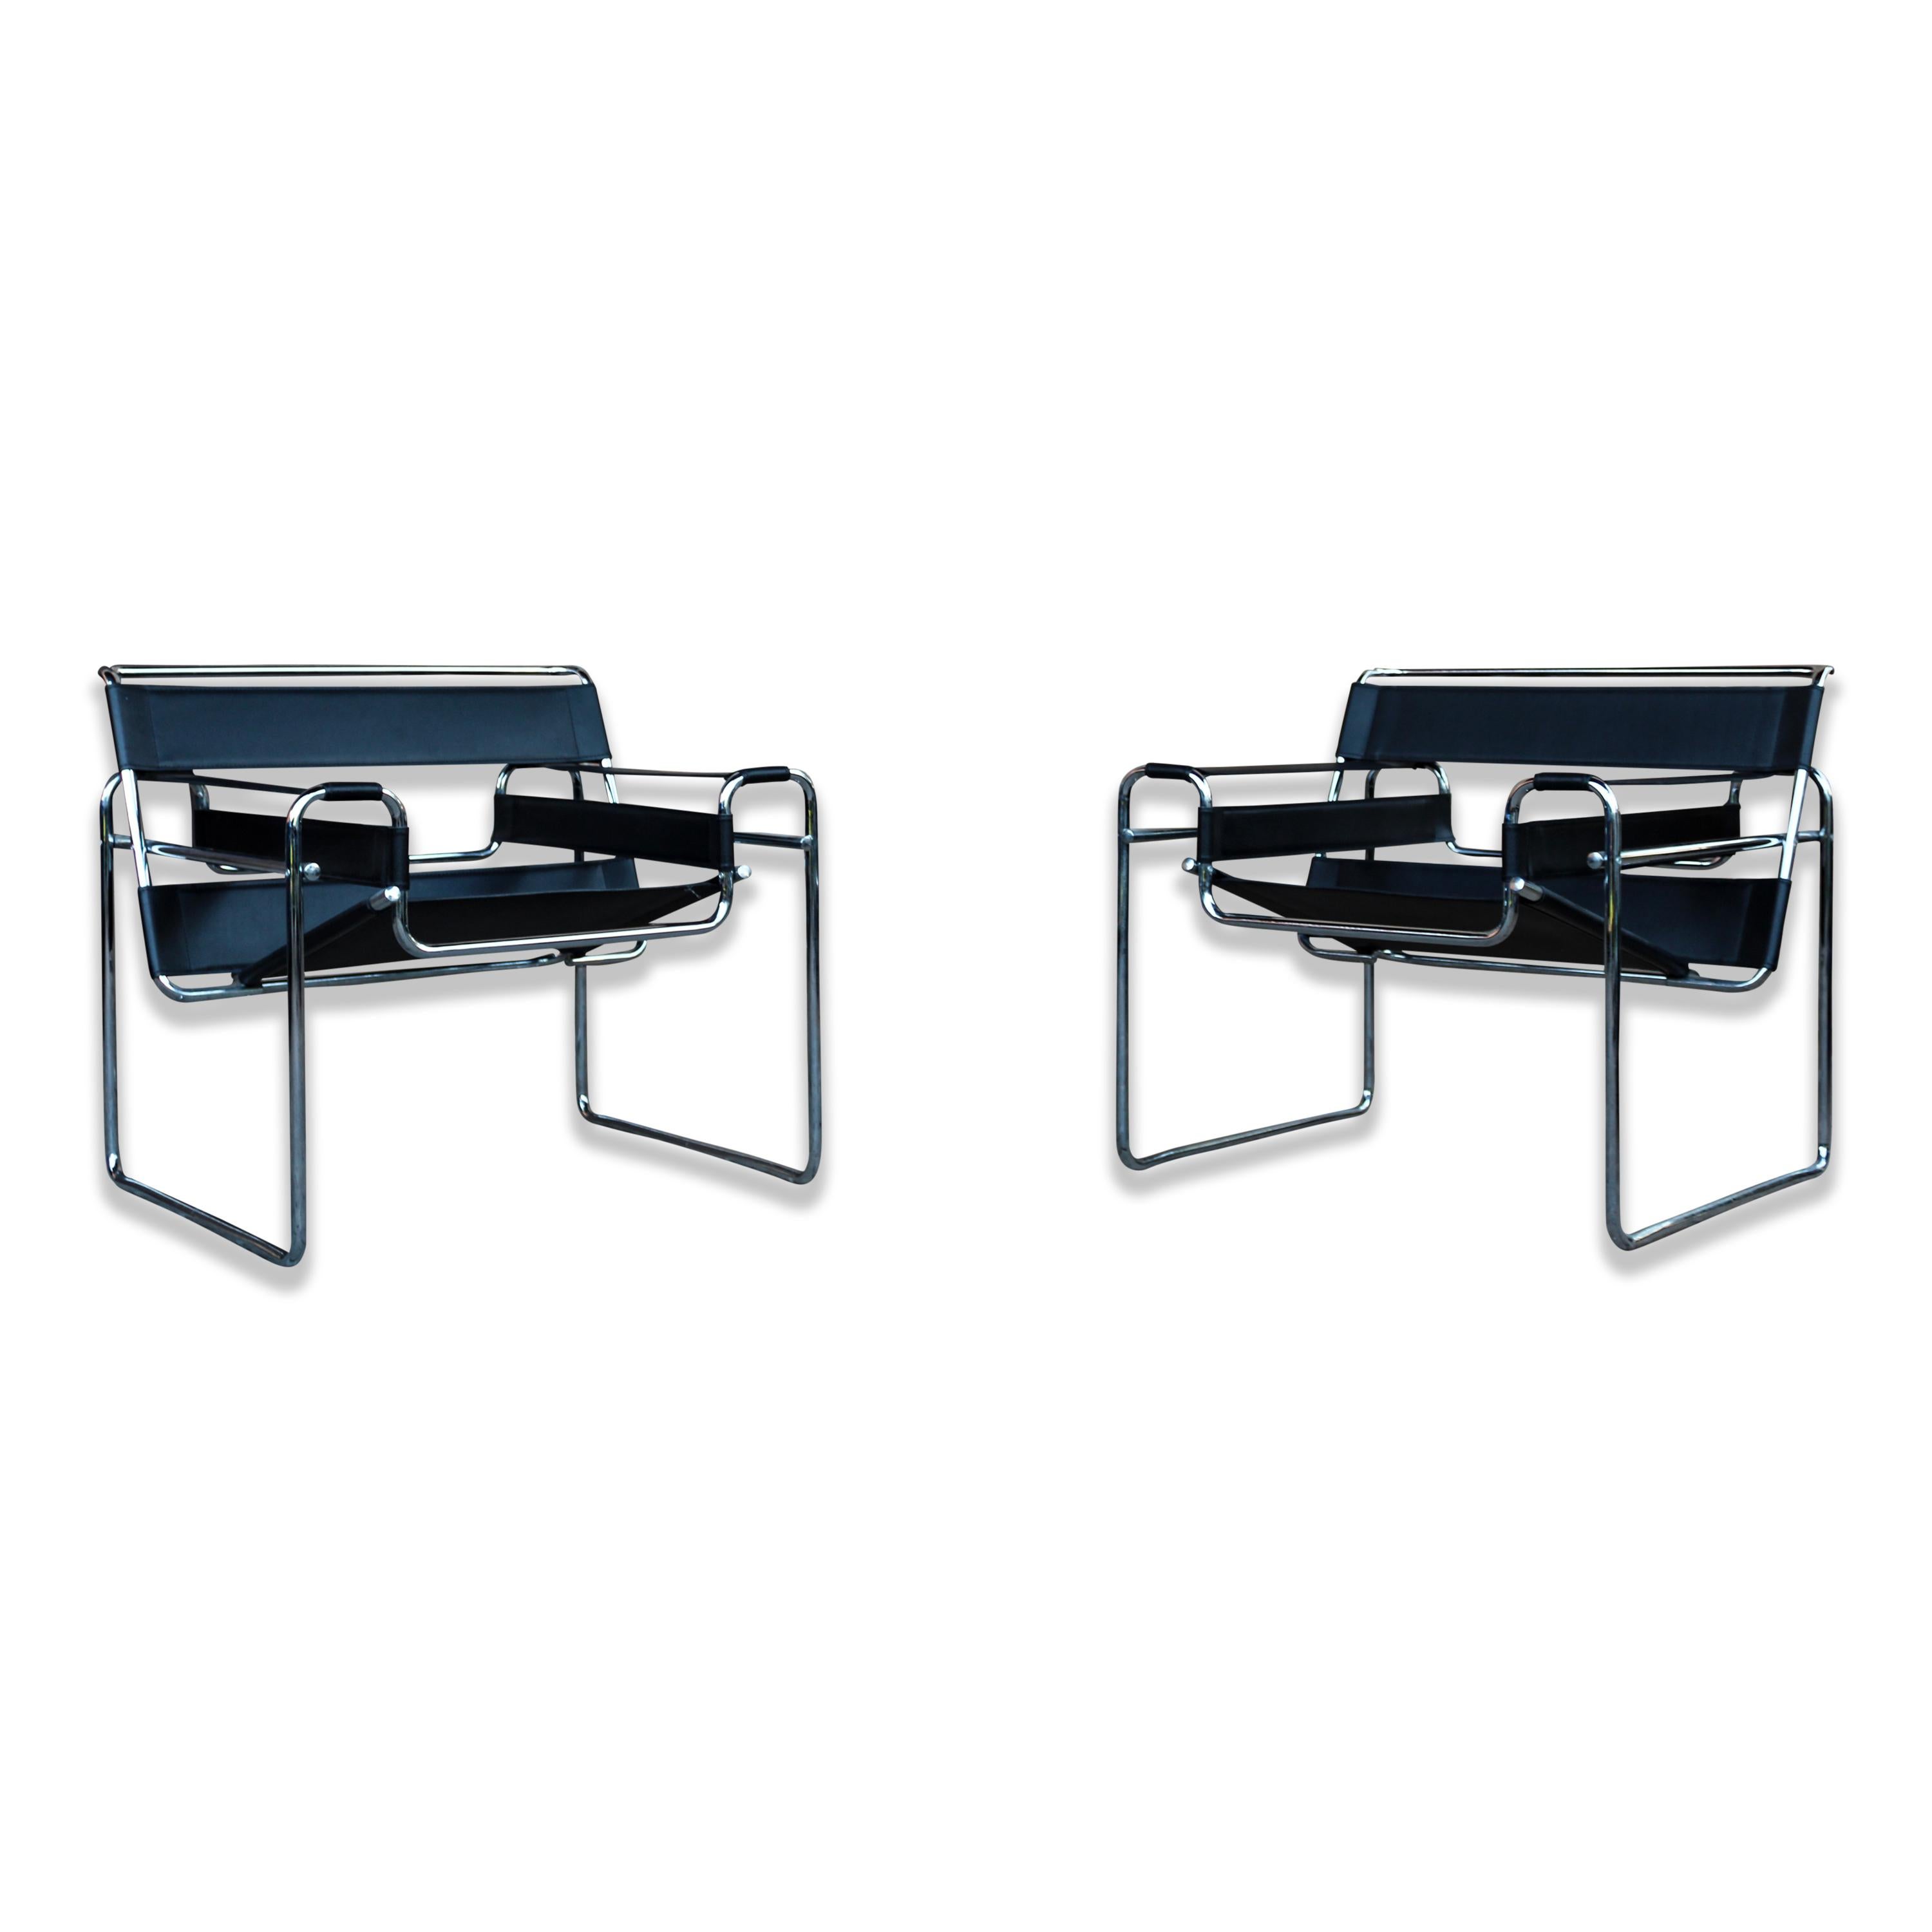 This set of 2 black leather Wassily chairs was designed in 1925 by Marcel Breuer and manufactured by Gavina, 1972. Inspired by the frame of a bicycle and influenced by the constructivist theories of the De Stijl movement, Marcel Breuer was still an